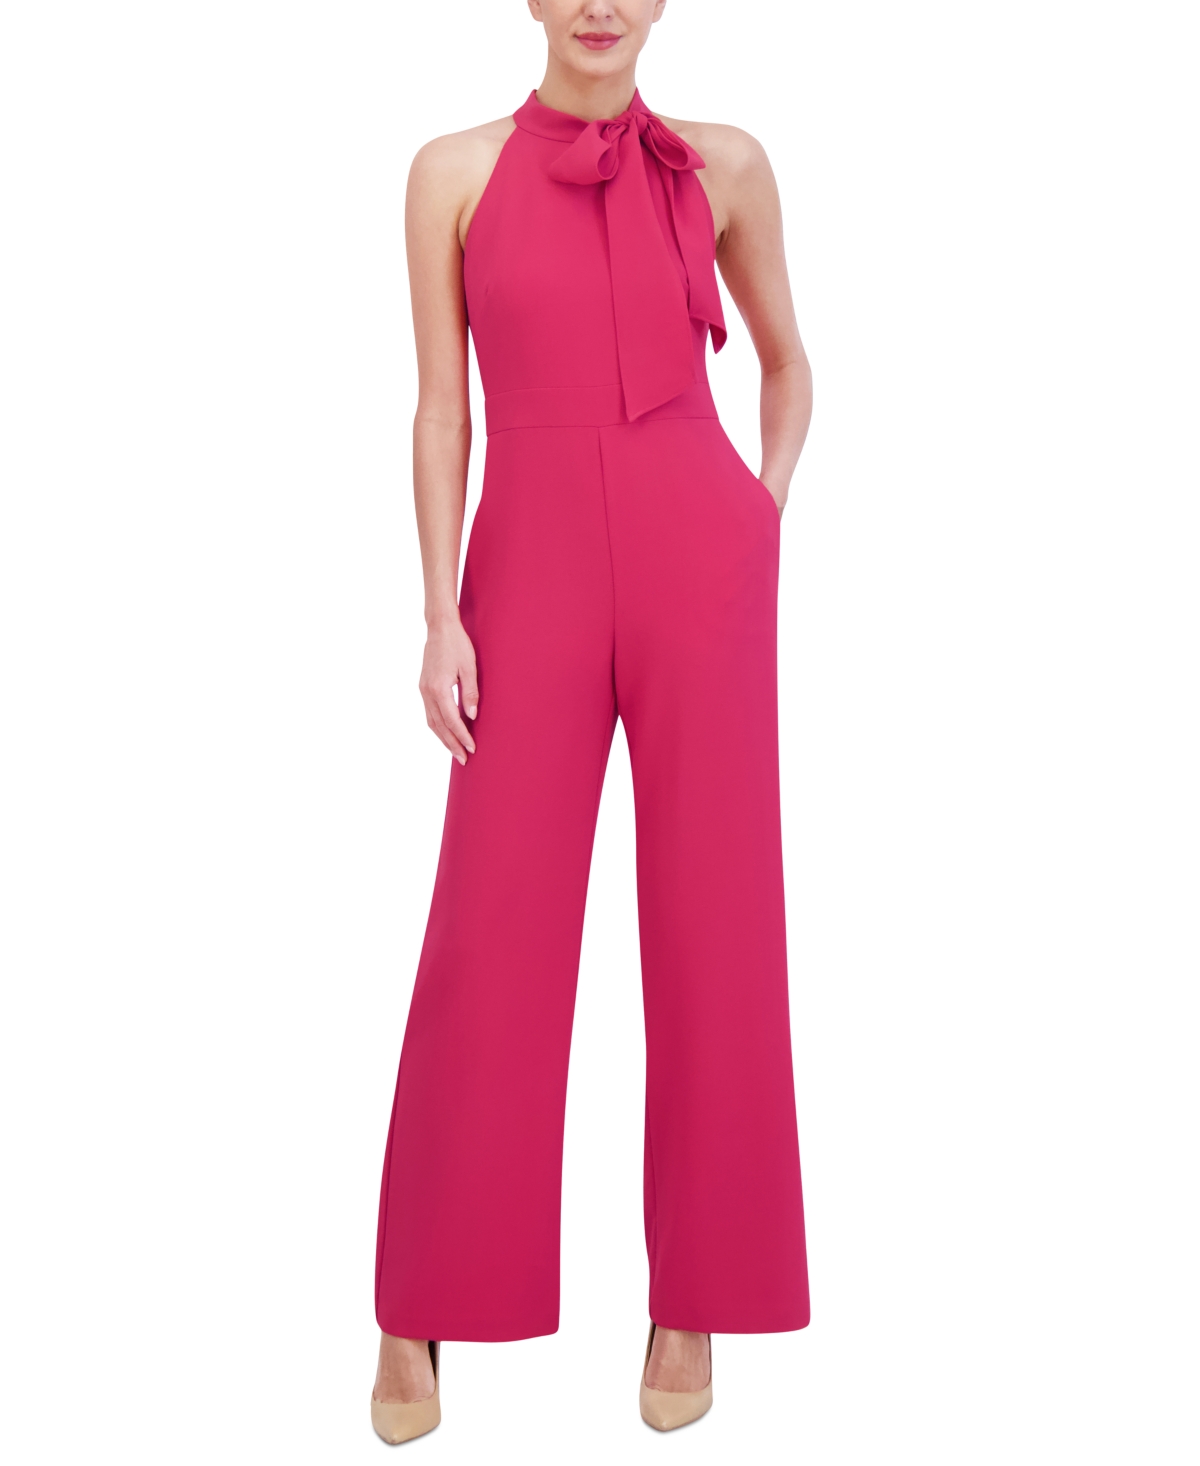 Women's Stretch-Crepe Tie-Neck Sleeveless Jumpsuit - Hot Pink